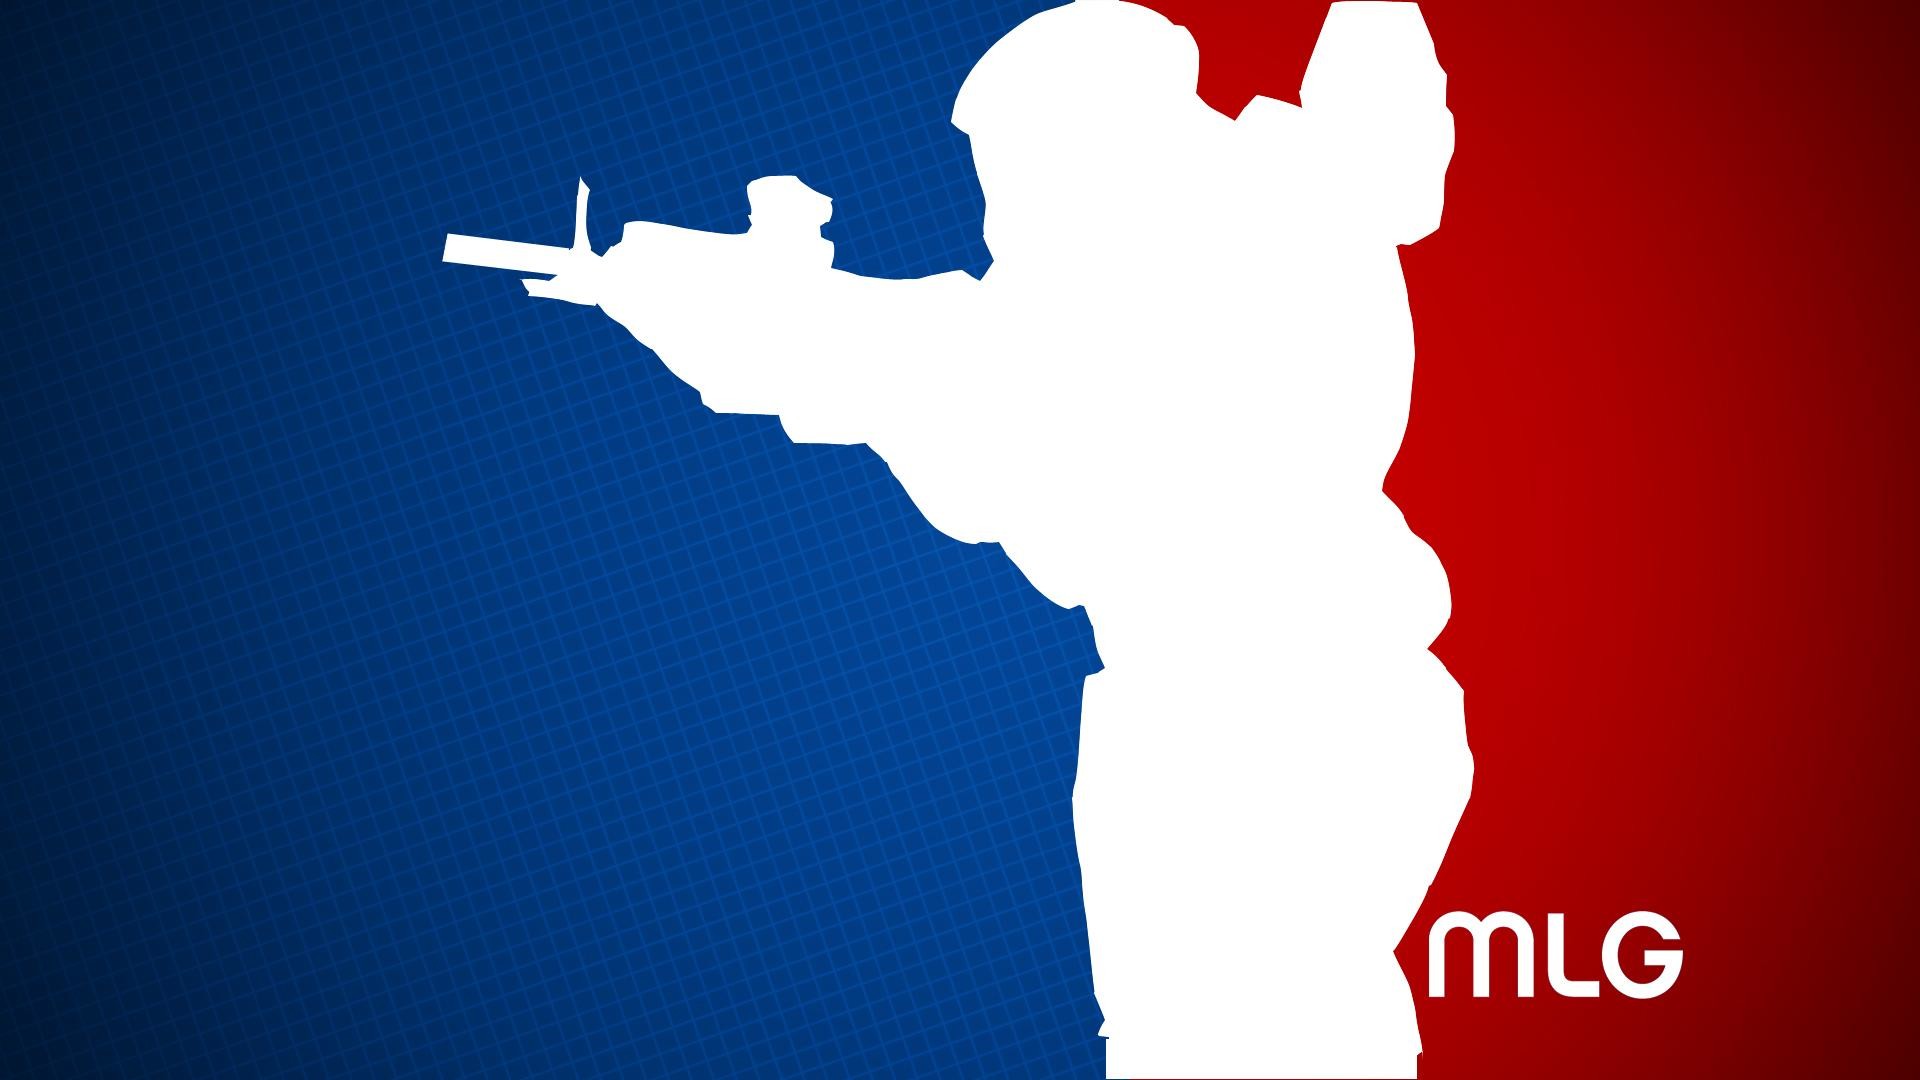 Mlg Backgrounds Free Download